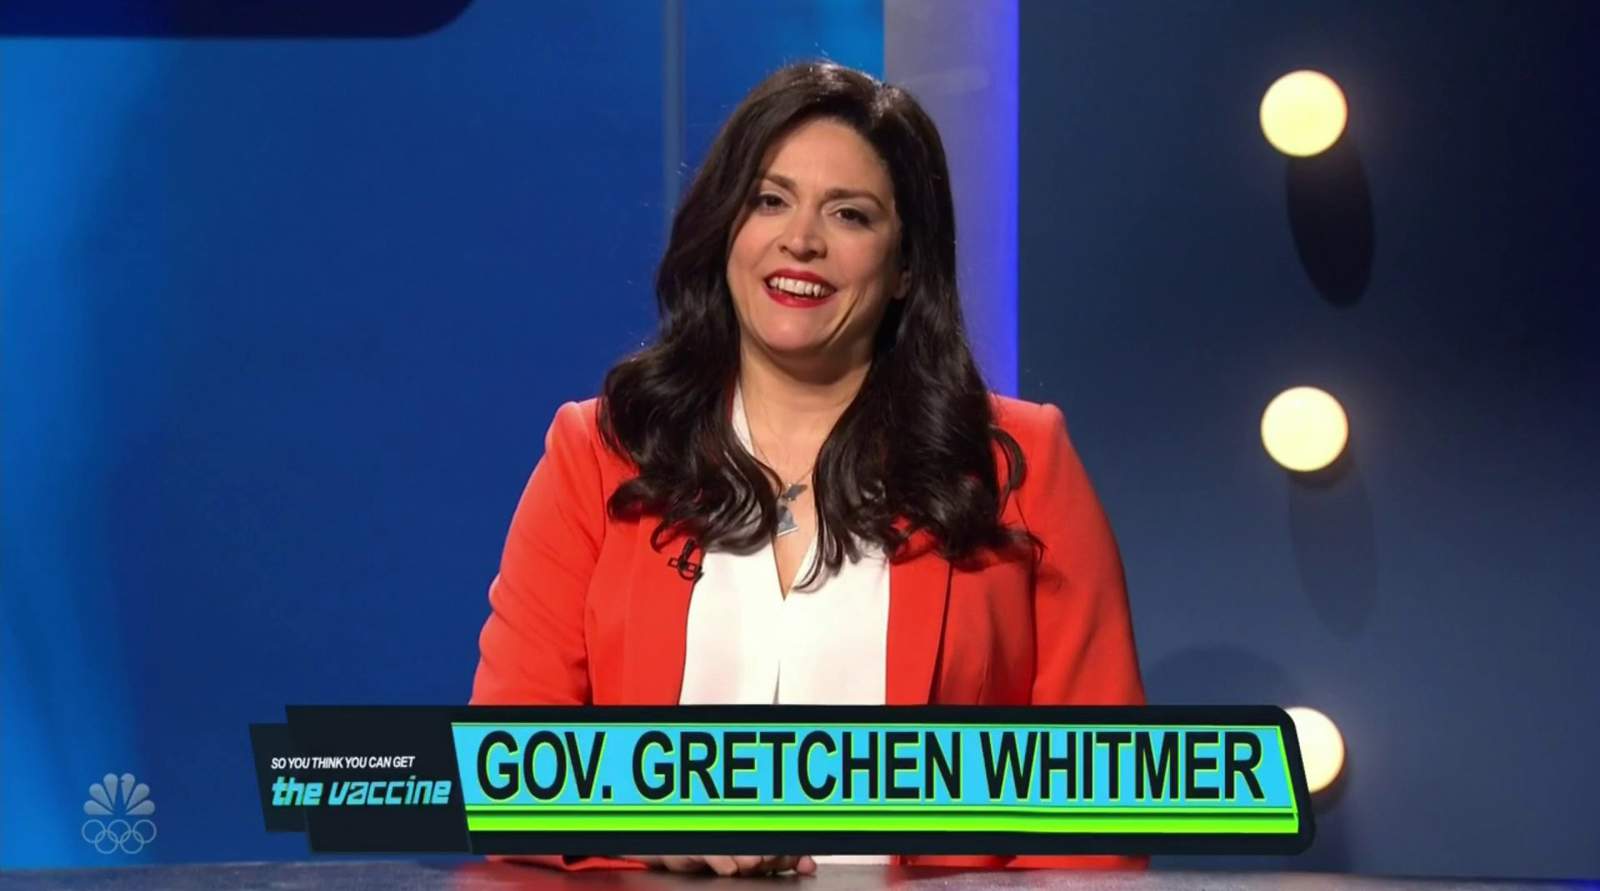 Cecily Strong’s take on Gov. Whitmer returns to Saturday Night Live